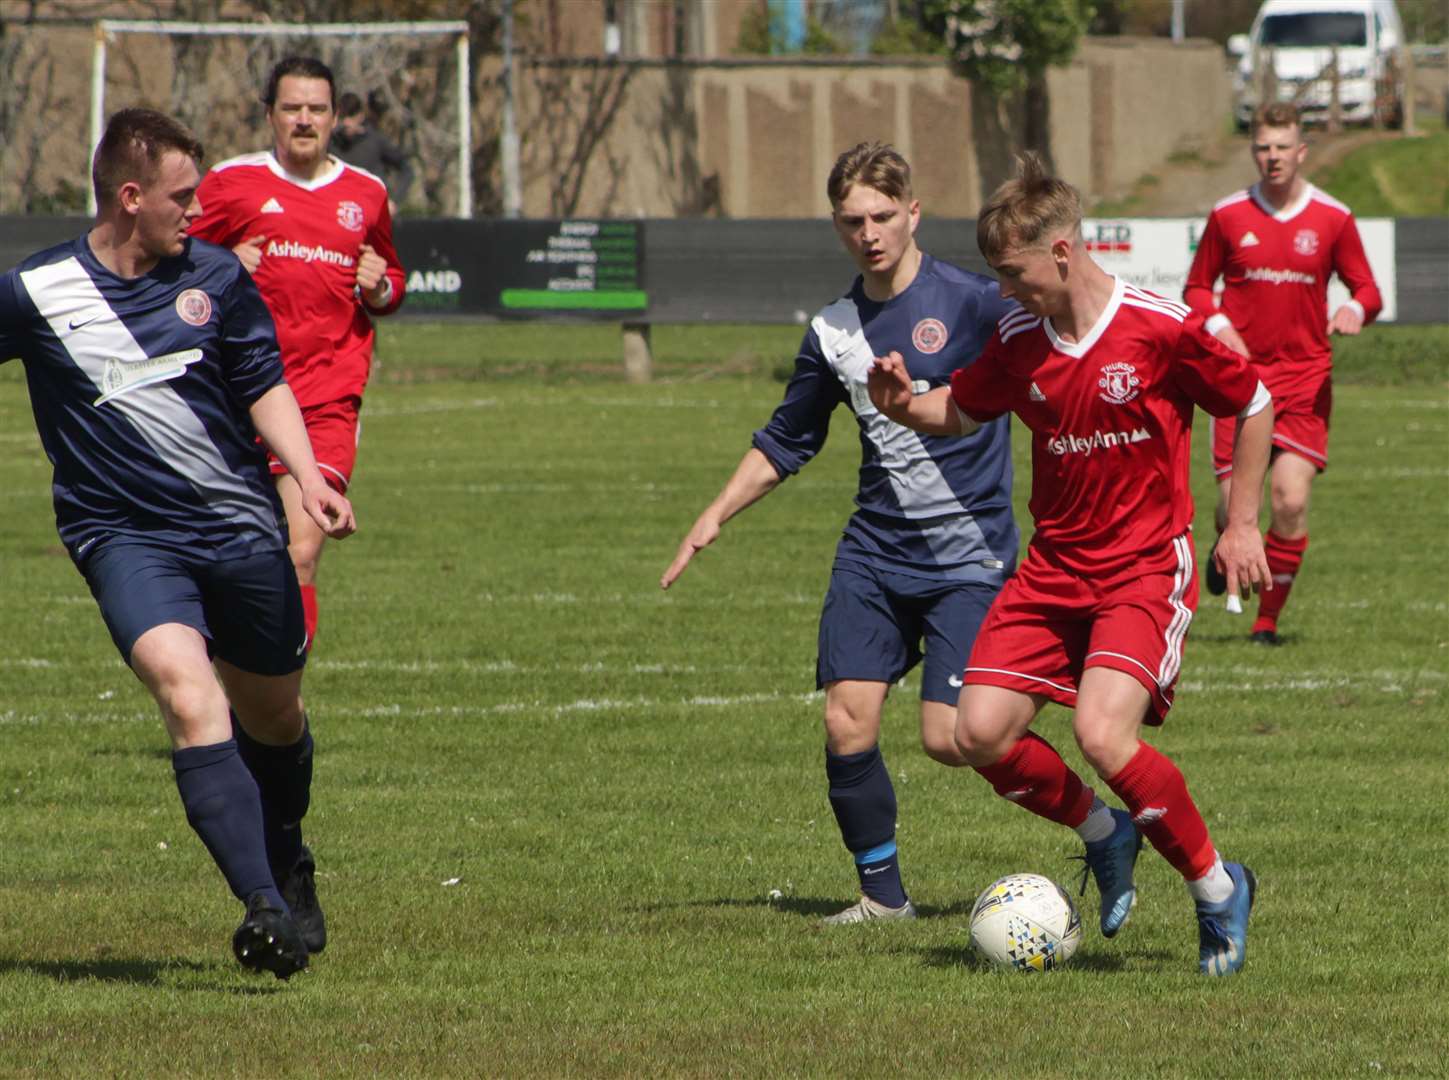 Thurso came from behind to beat Halkirk United 2-1 at the Dammies in the most recent Caithness derby in the North Caledonian League, in May this year.